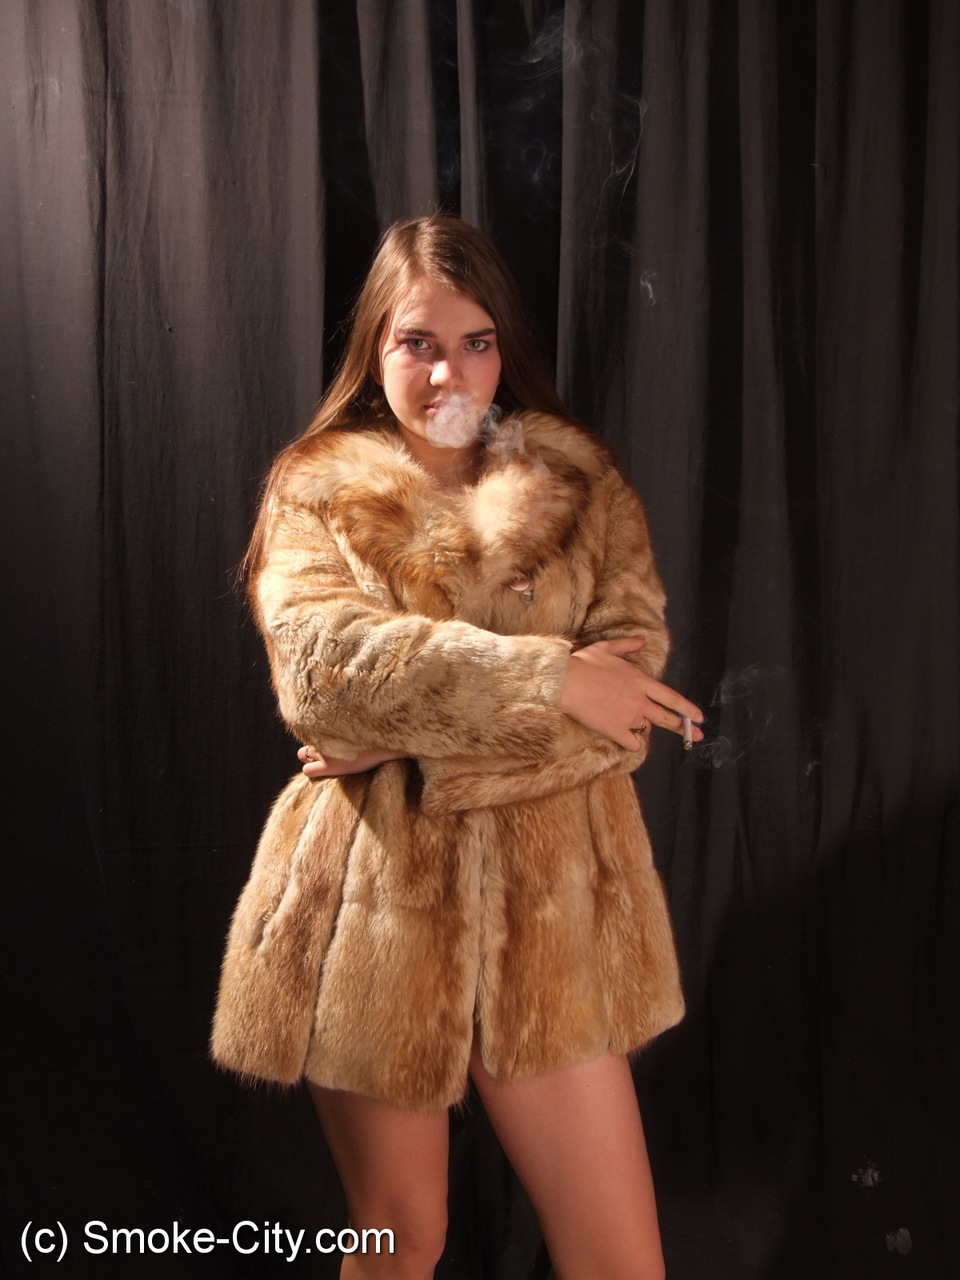 Amateur model smokes while removing fur coat for nude poses